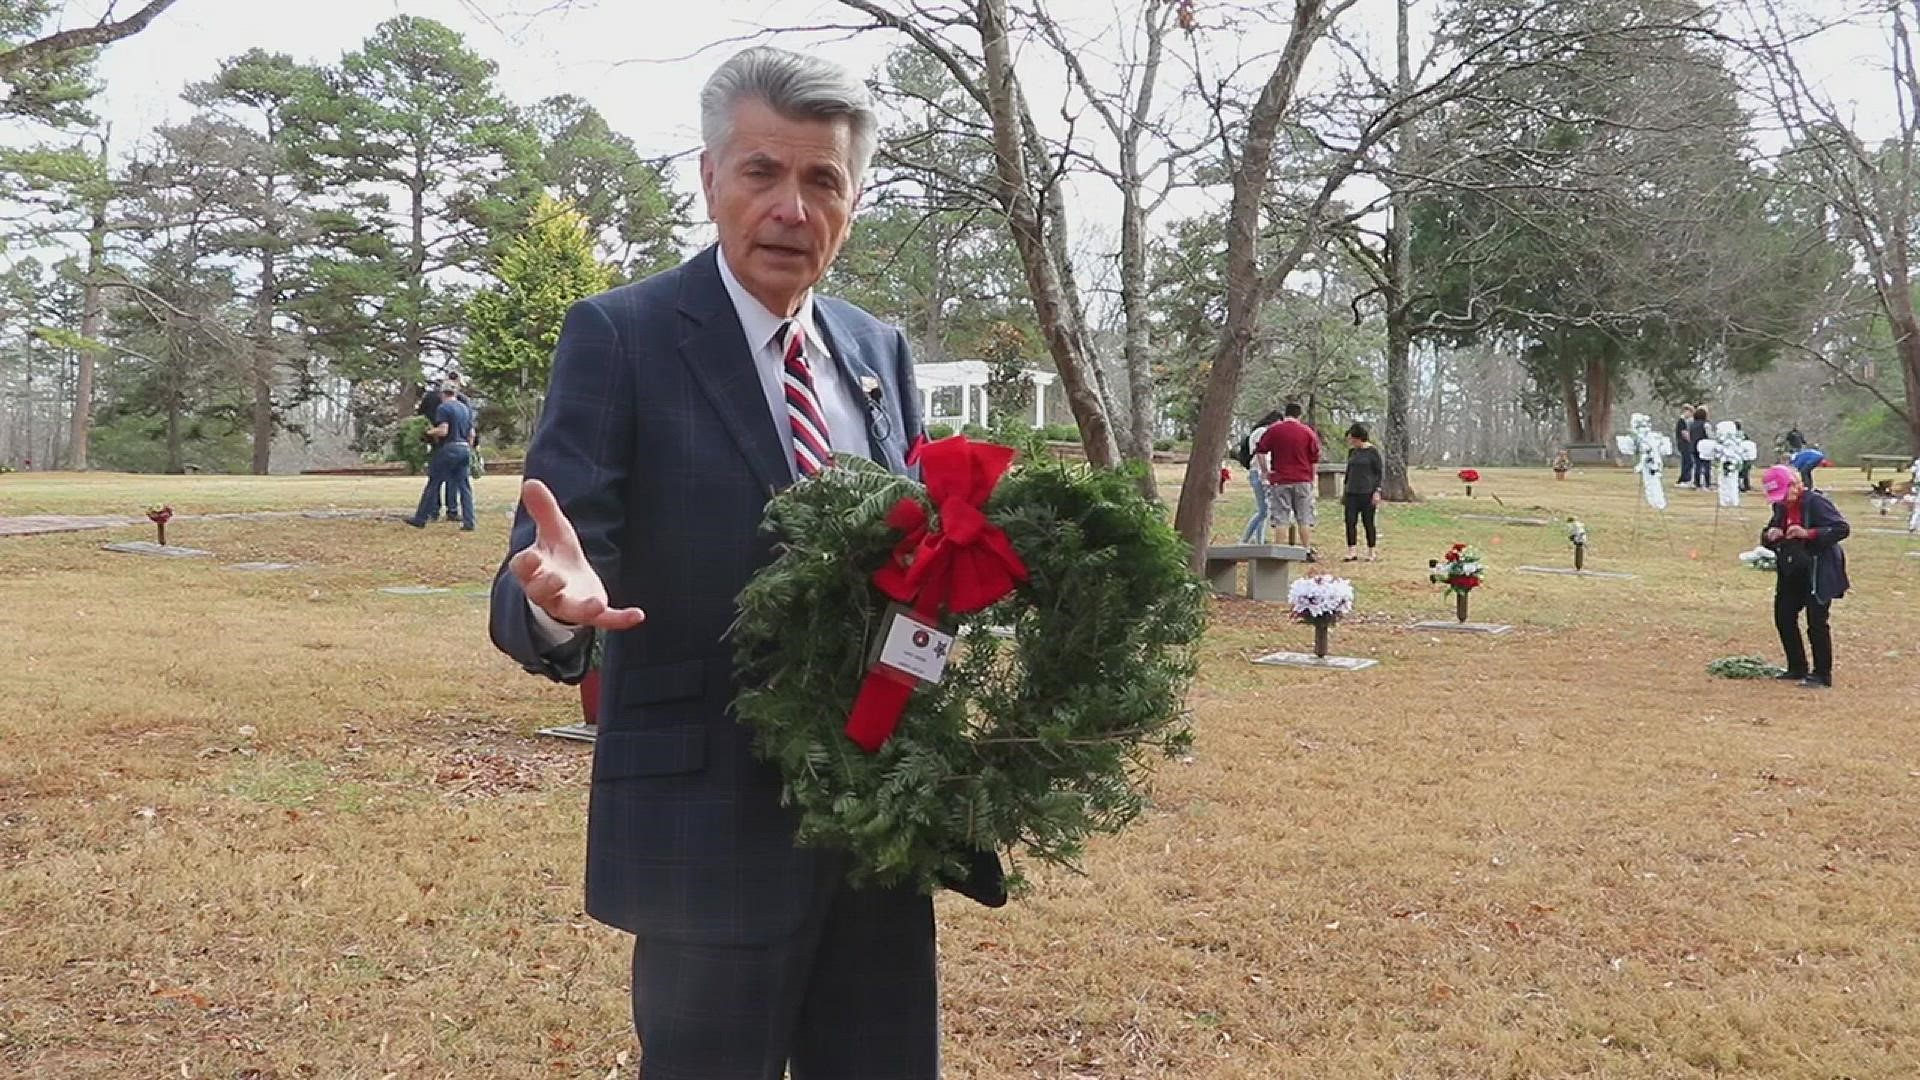 Volunteers spent the day at both locations placing wreaths on the graves of the country's fallen heroes and reading their names aloud.